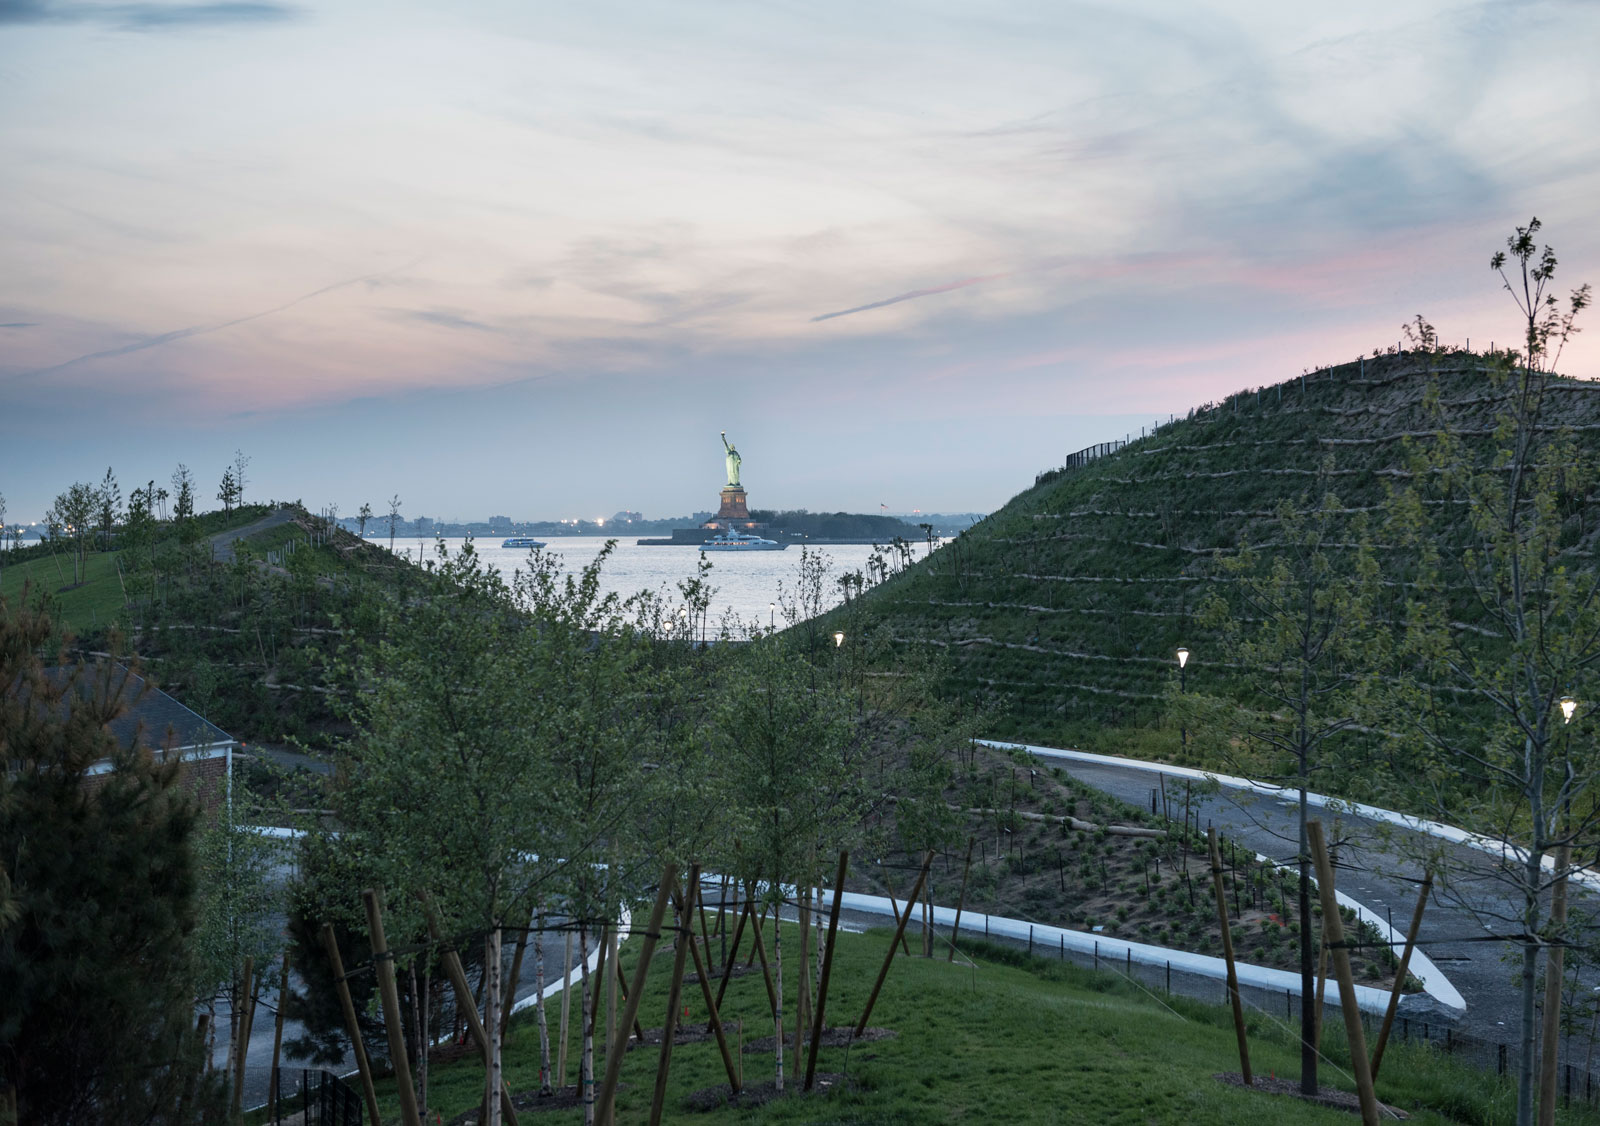 West 8's man-made Discovery and Outlook Hills, with the Statue of Liberty in the distance, Governors Island, New York, 2016